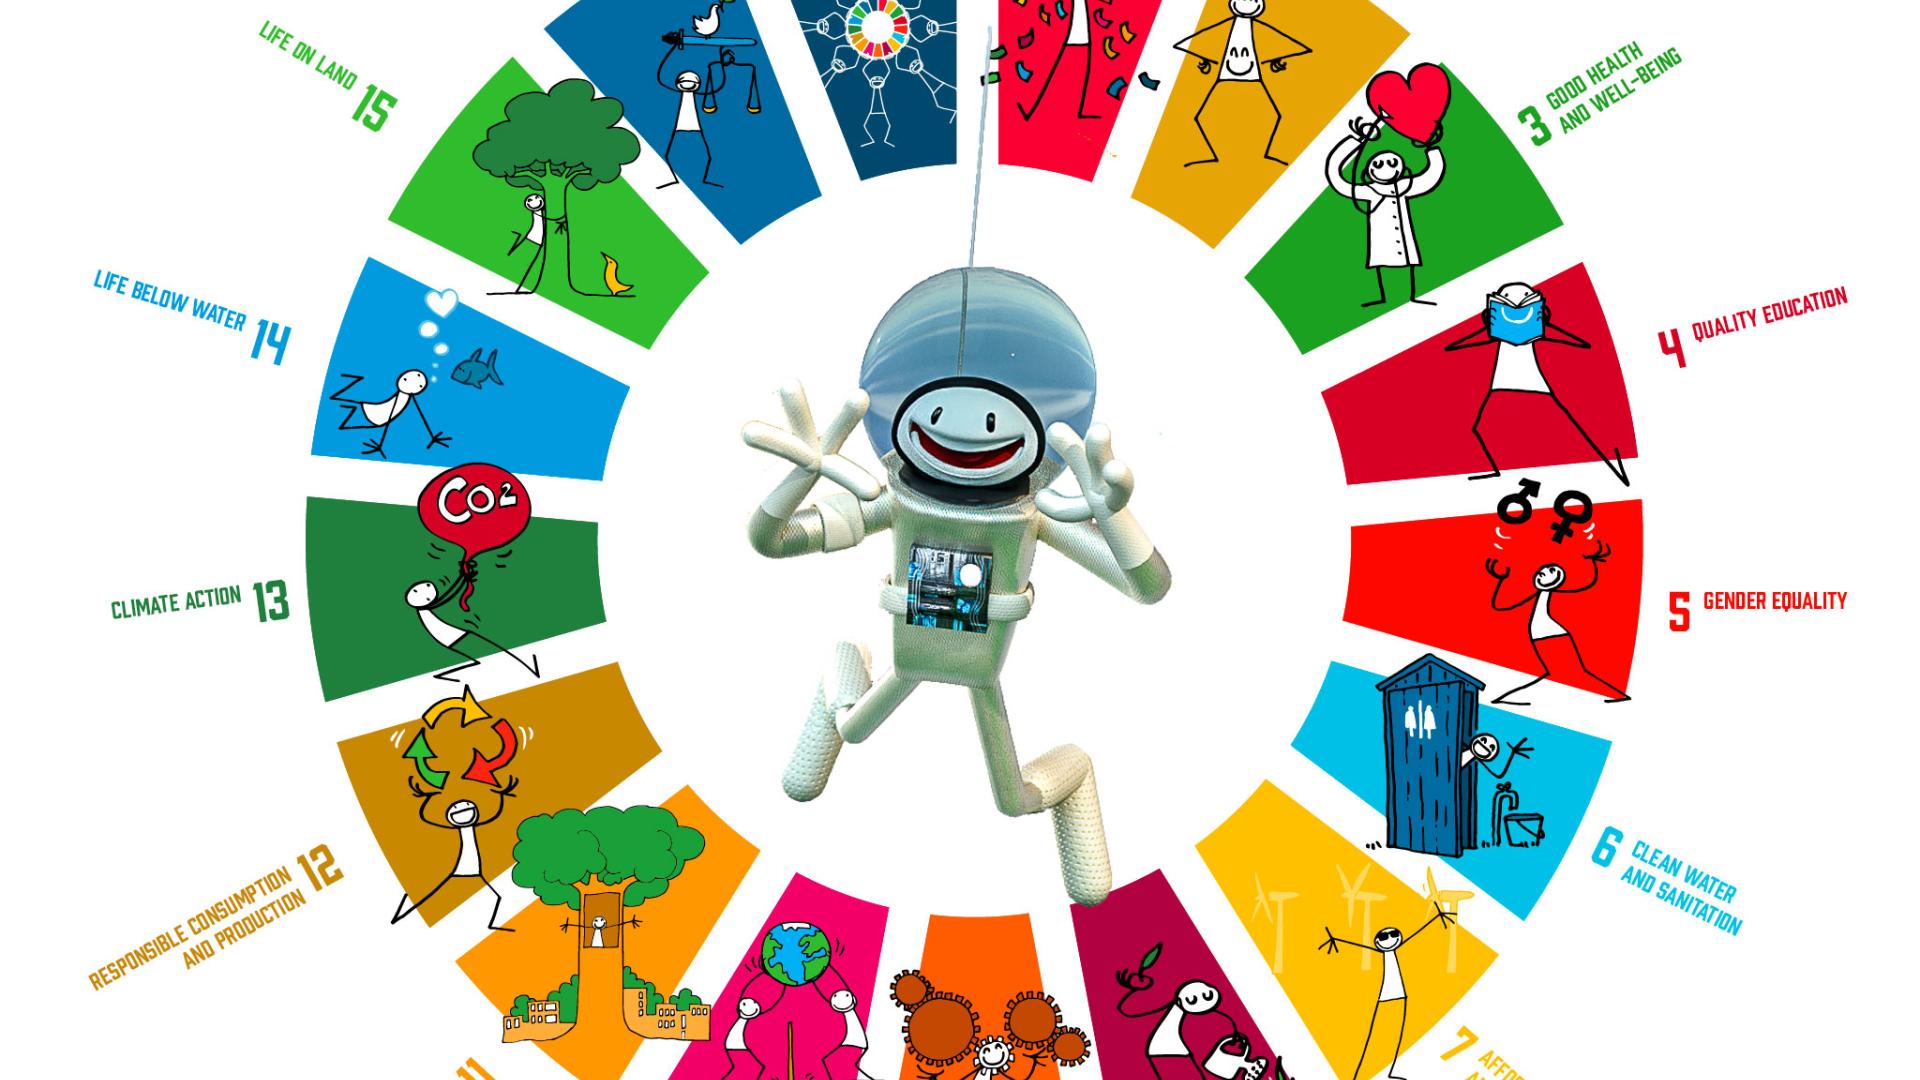 In 2022, the SCO asked ELYX, the United Nations' digital ambassador, to talk about the SDGs. ELYX then donned an astronaut's outfit to support the contribution of space to achieving the SDGs.